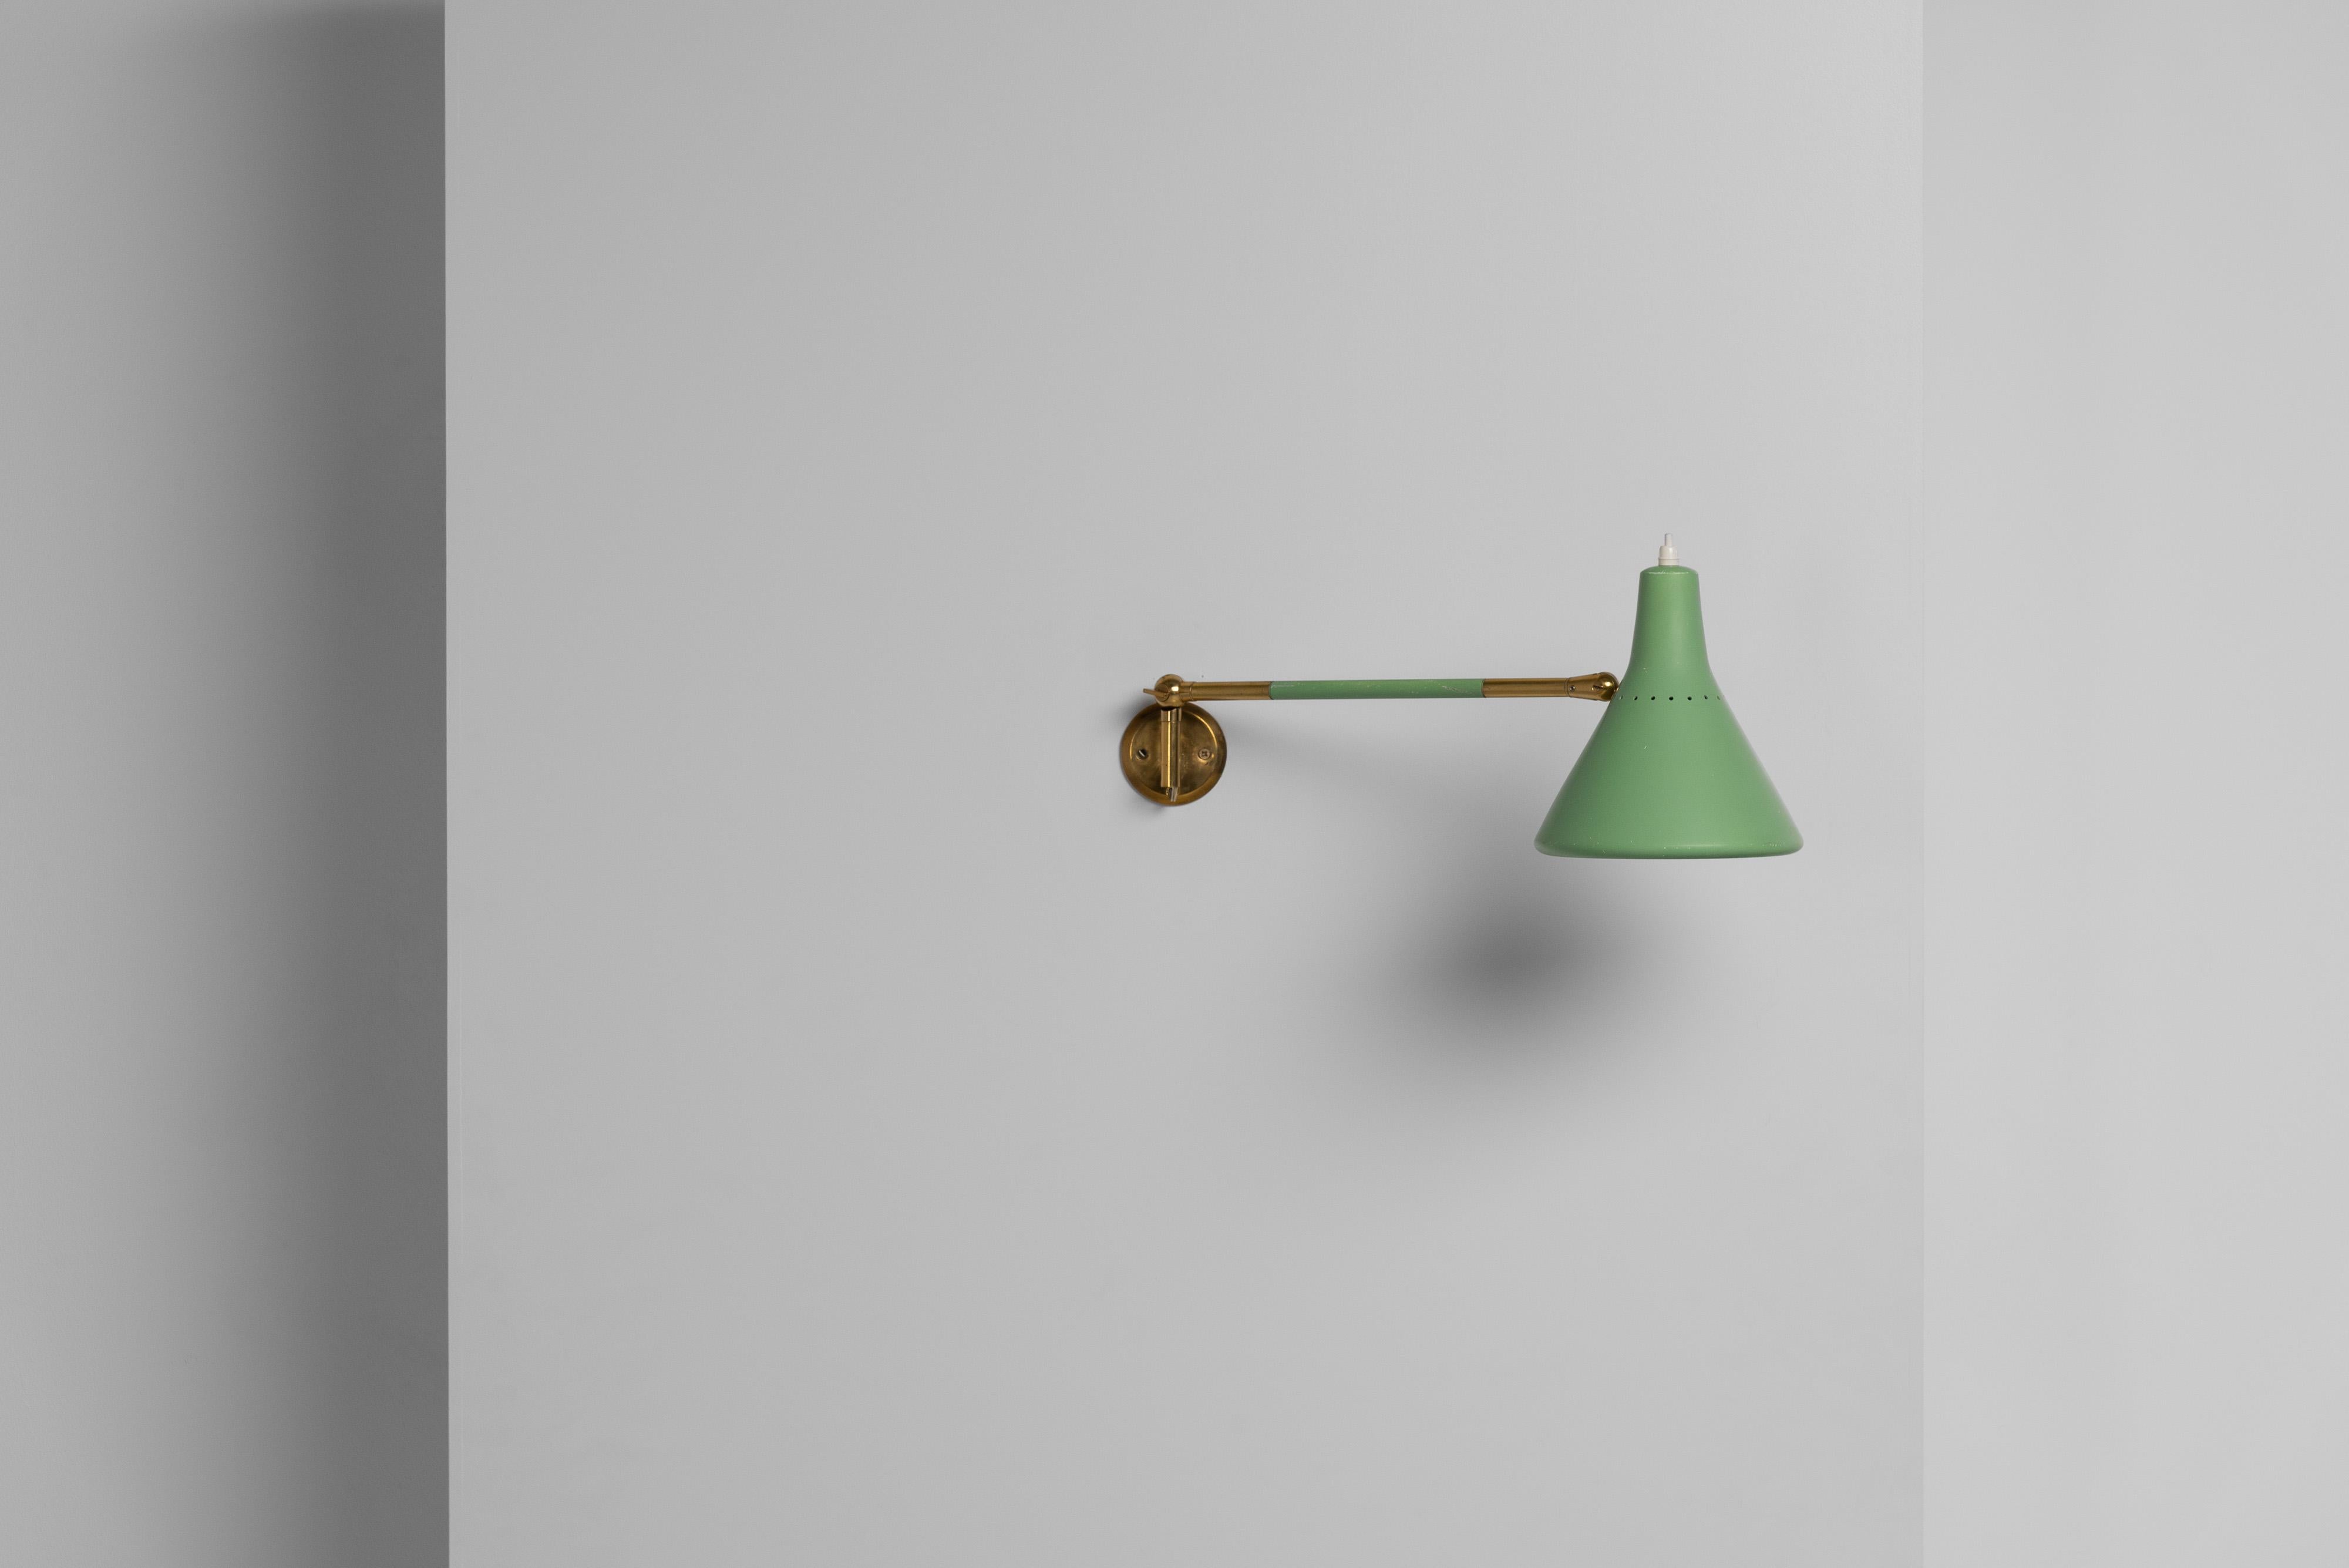 Beautiful Stilux adjustable wall lamp in brass manufactured in Italy in 1960. Characterised by its quintessential Italian design, Stilux stood as a notable competitor to renowned brands like Stilnovo and Arredoluce, pillars of the premium lighting